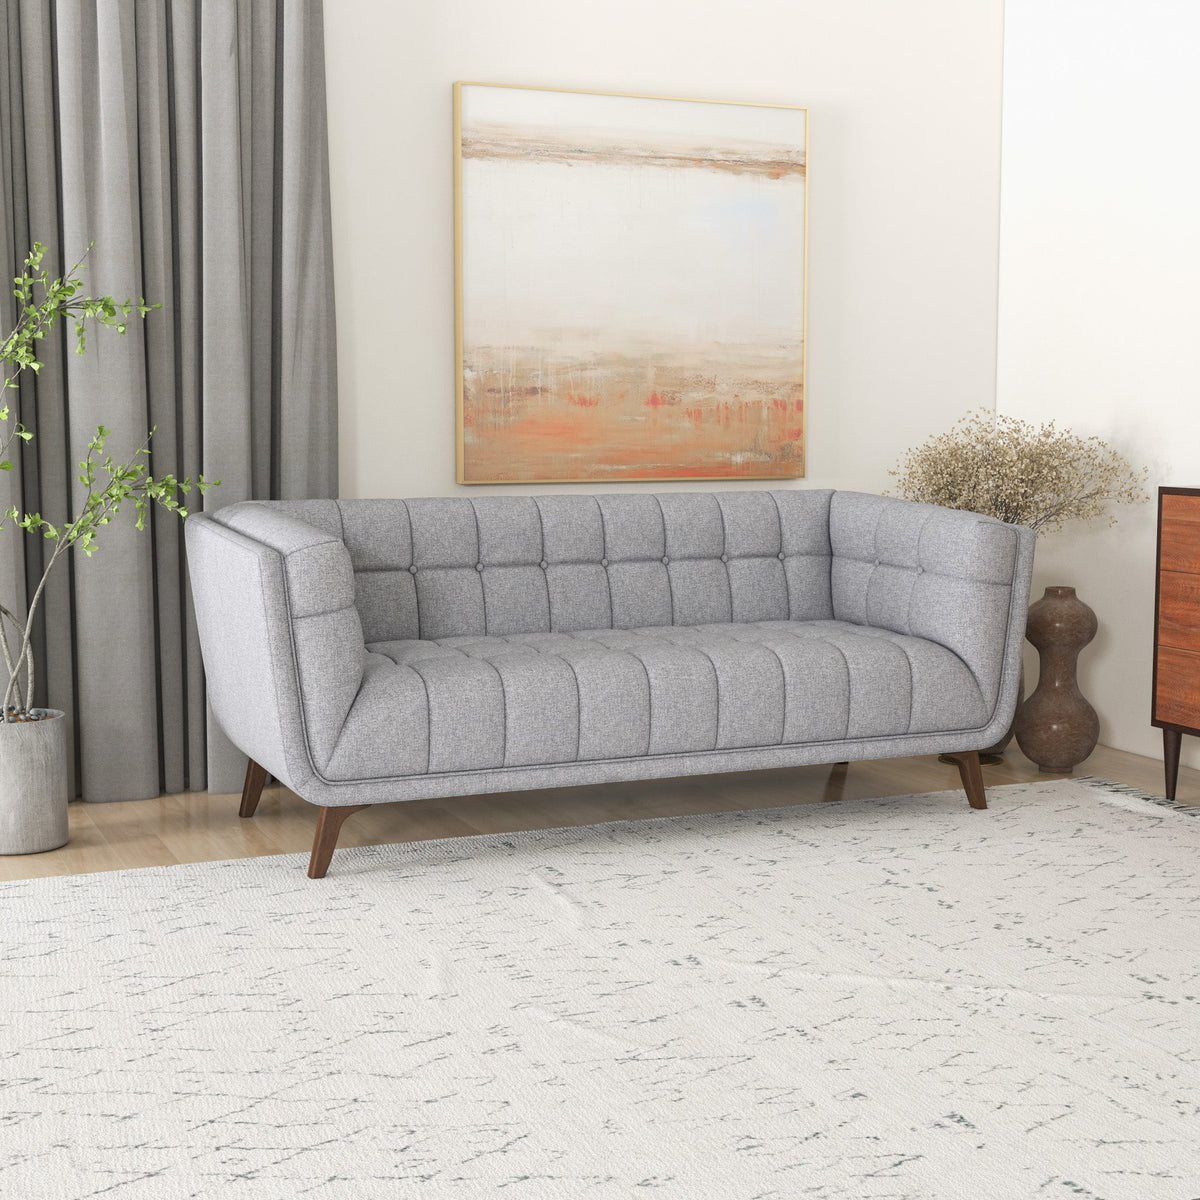 Kano Sofa 78" -  Light Gray  | Mid in Mod | Houston TX | Best Furniture stores in Houston